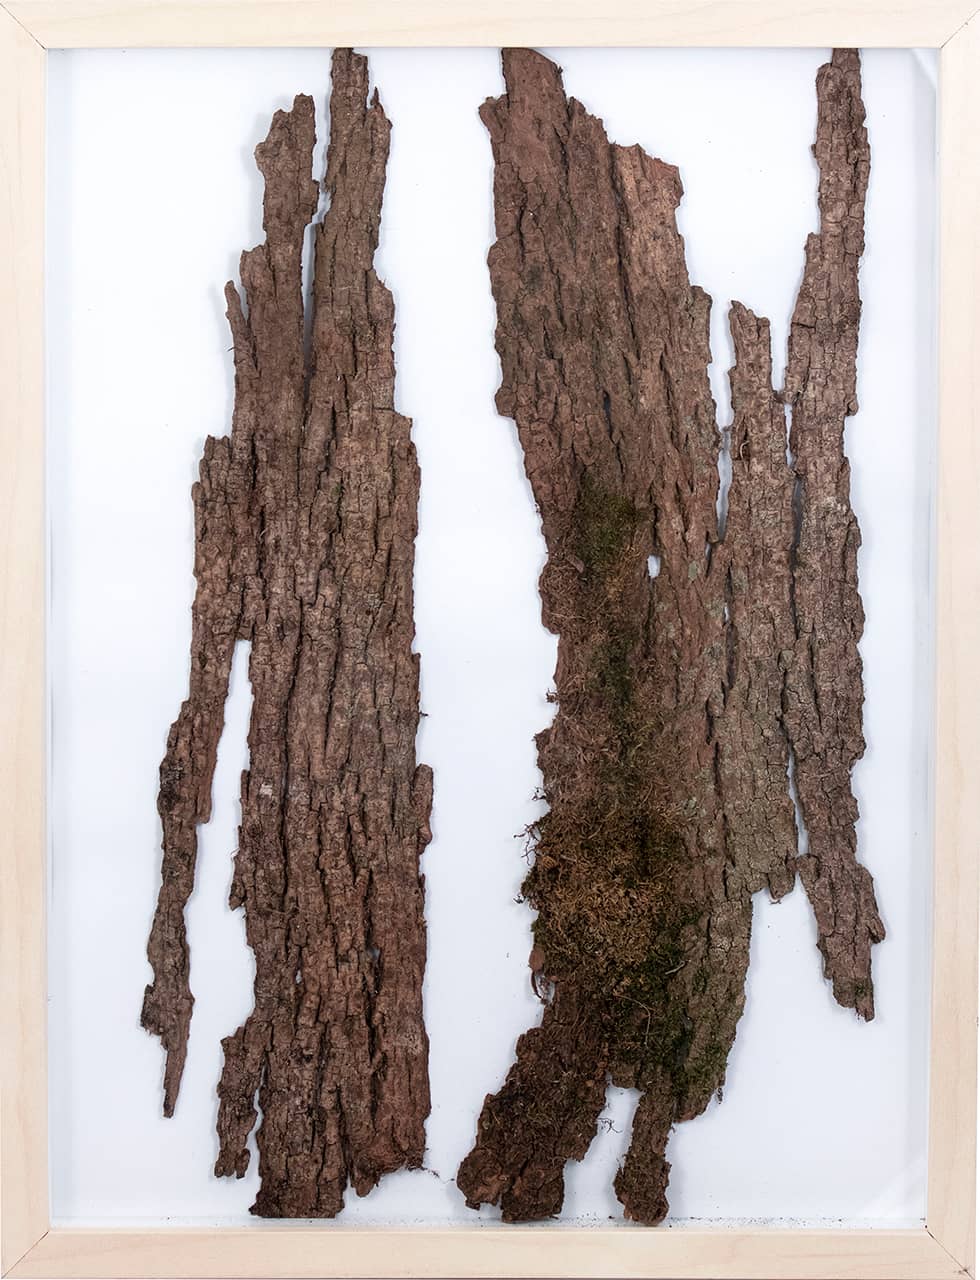 'Robinia', assemblage (bark and natural pigment on paper, framed). Artwork by Francesca Virginia Coppola